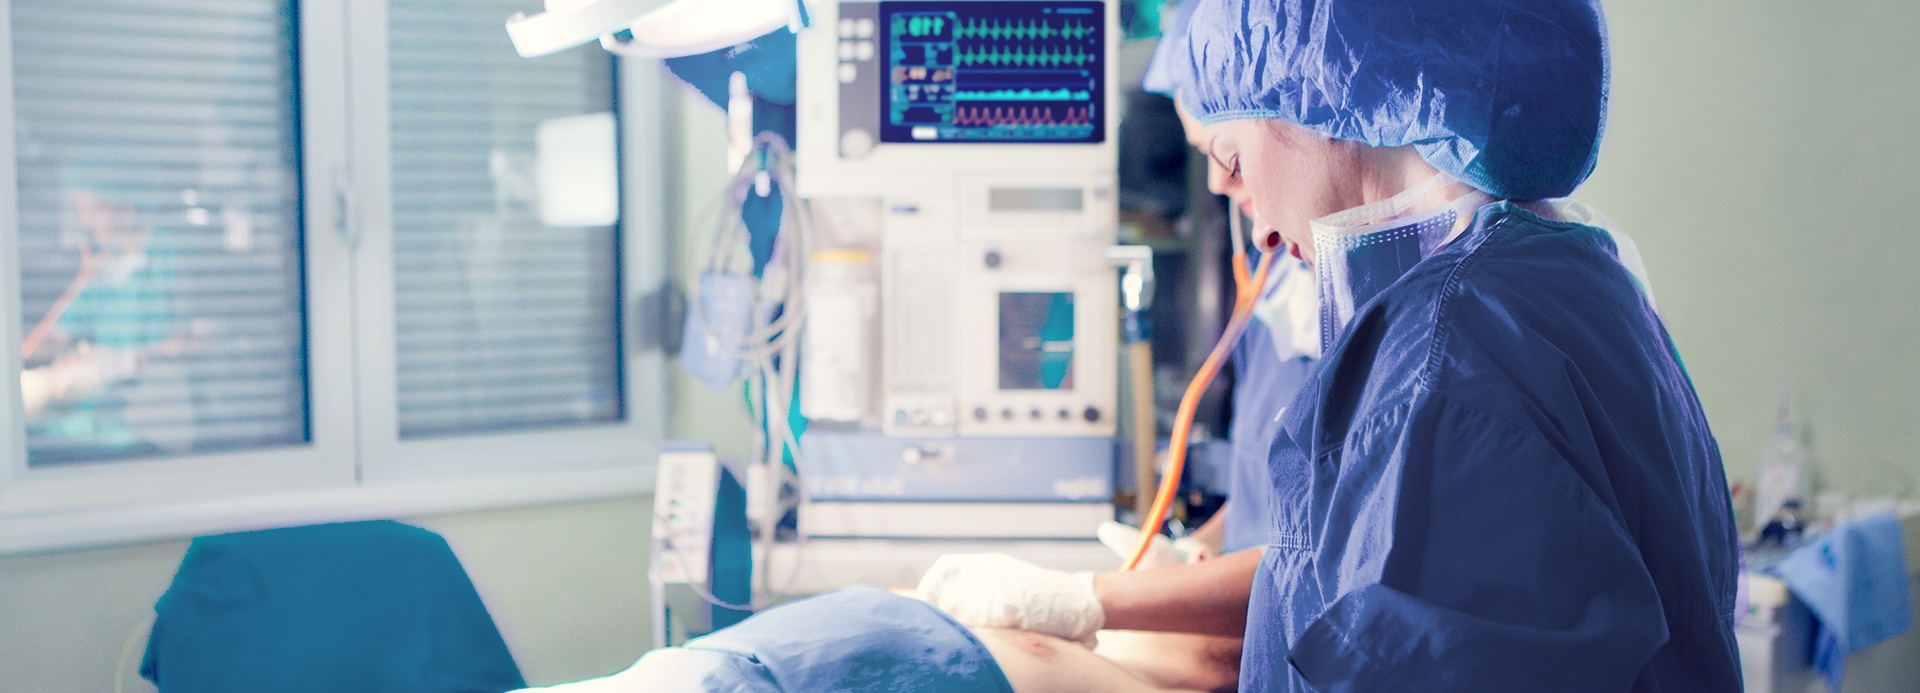 Anesthesia Care: Ensuring Comfort and Safety during Medical Procedures